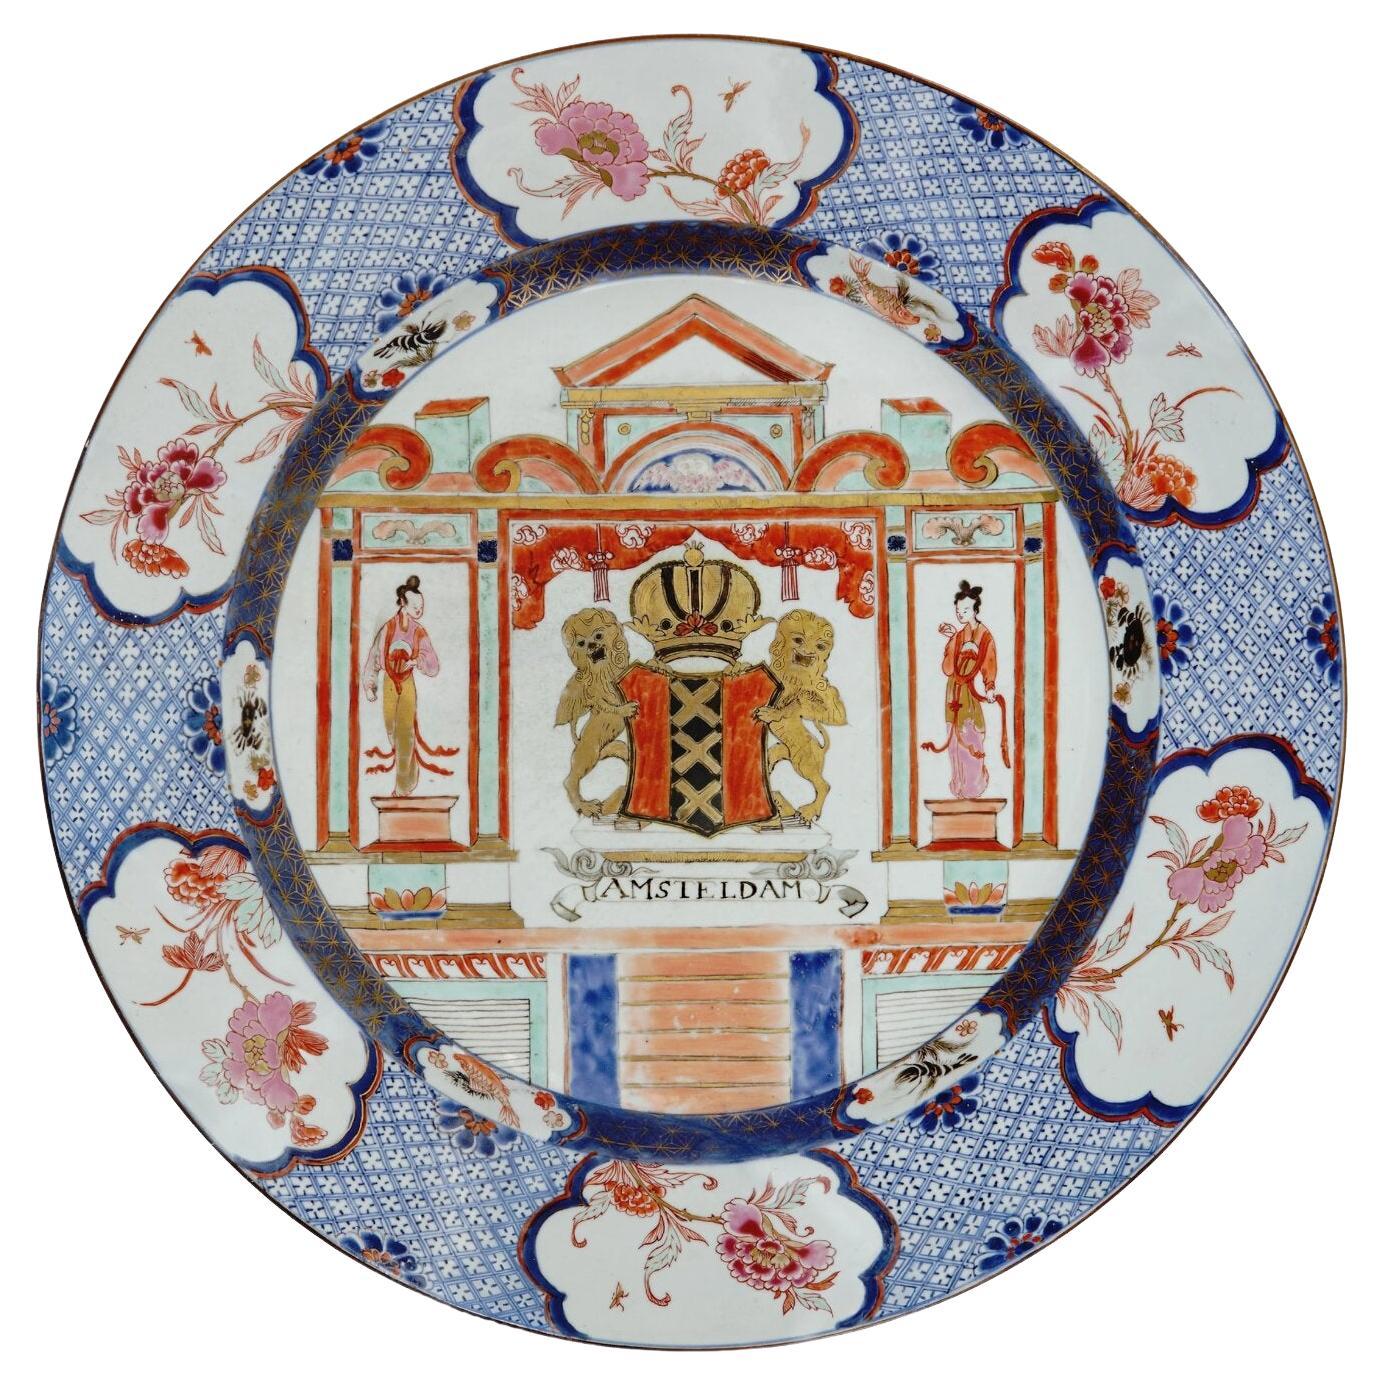  An extremely rare Chinese export famille rose armorial porcelain charger